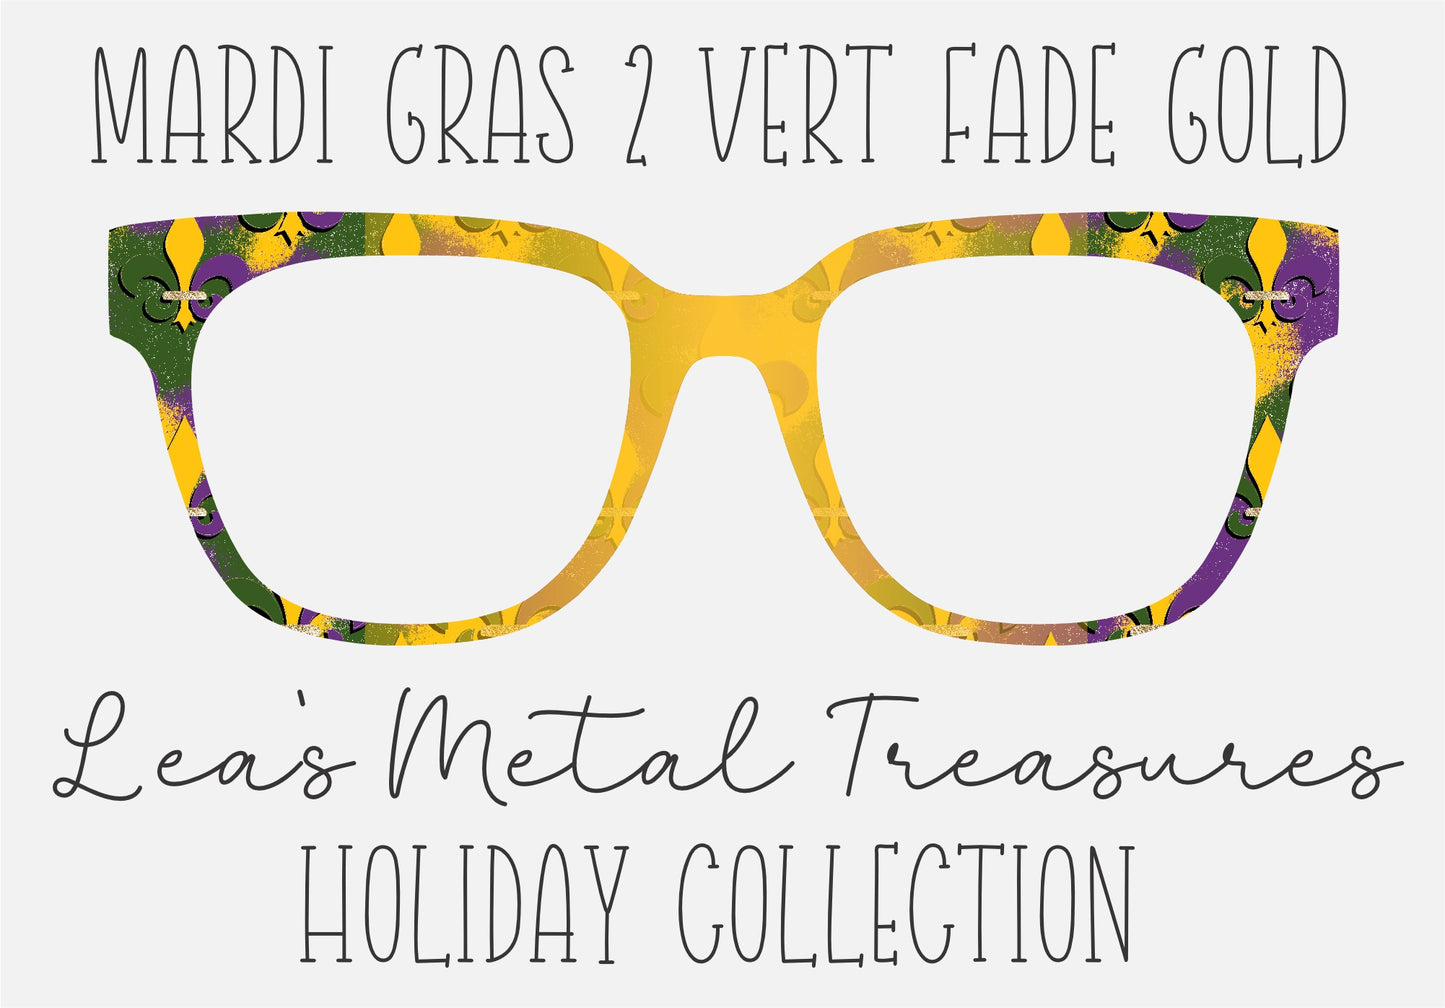 Mardi Gras 2 vert fade FBC433 Eyewear Frame Toppers COMES WITH MAGNETS